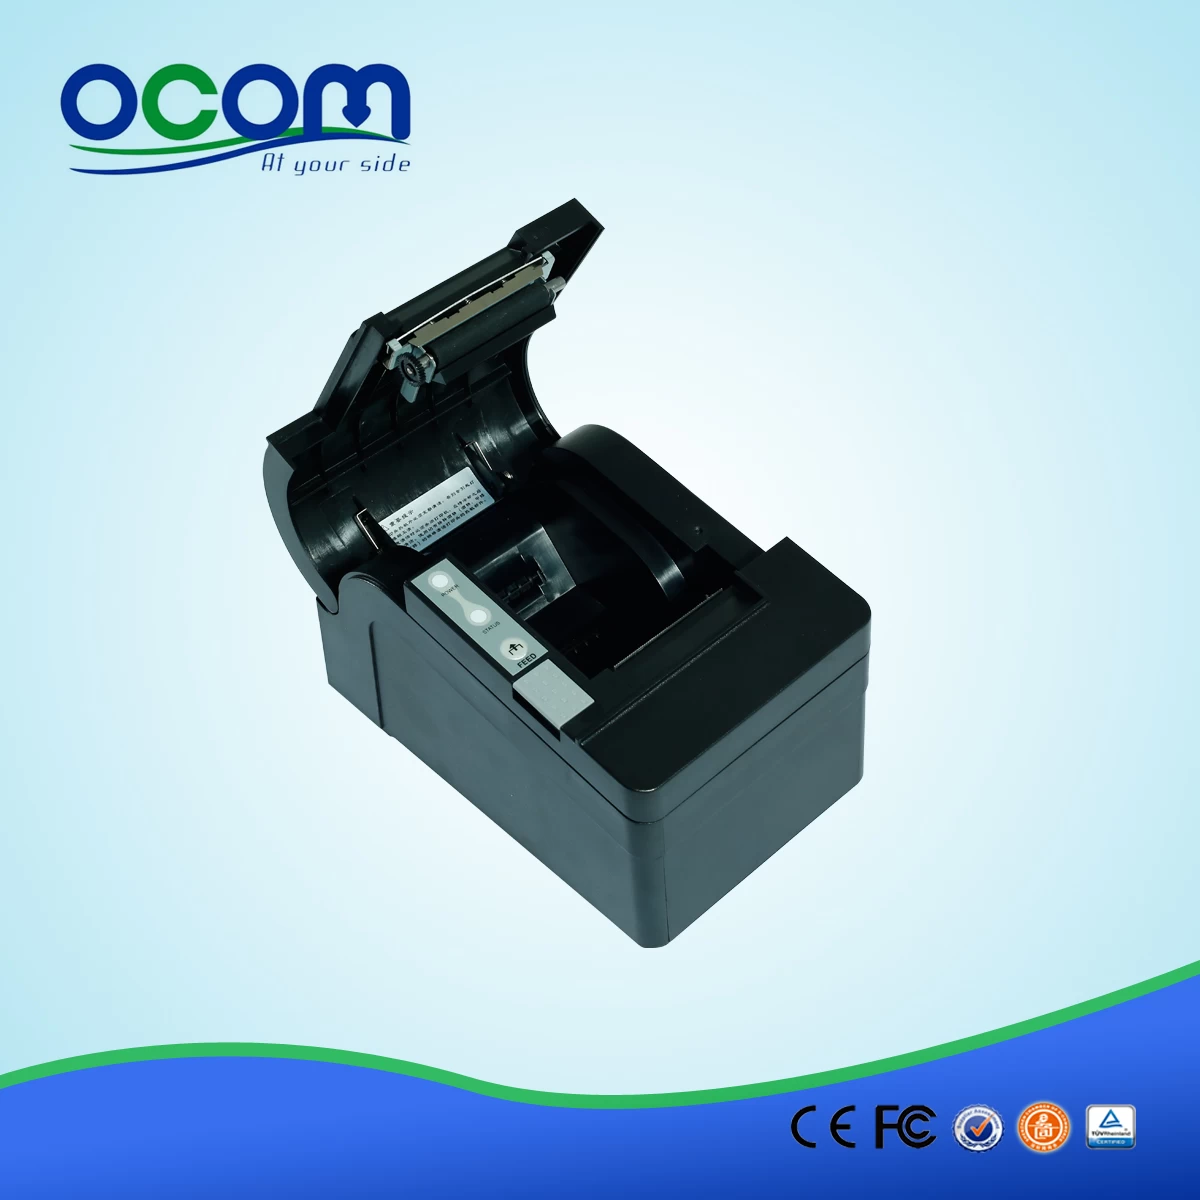 2-inch thermal POS printer with cutter Anto (OCPP-58C)